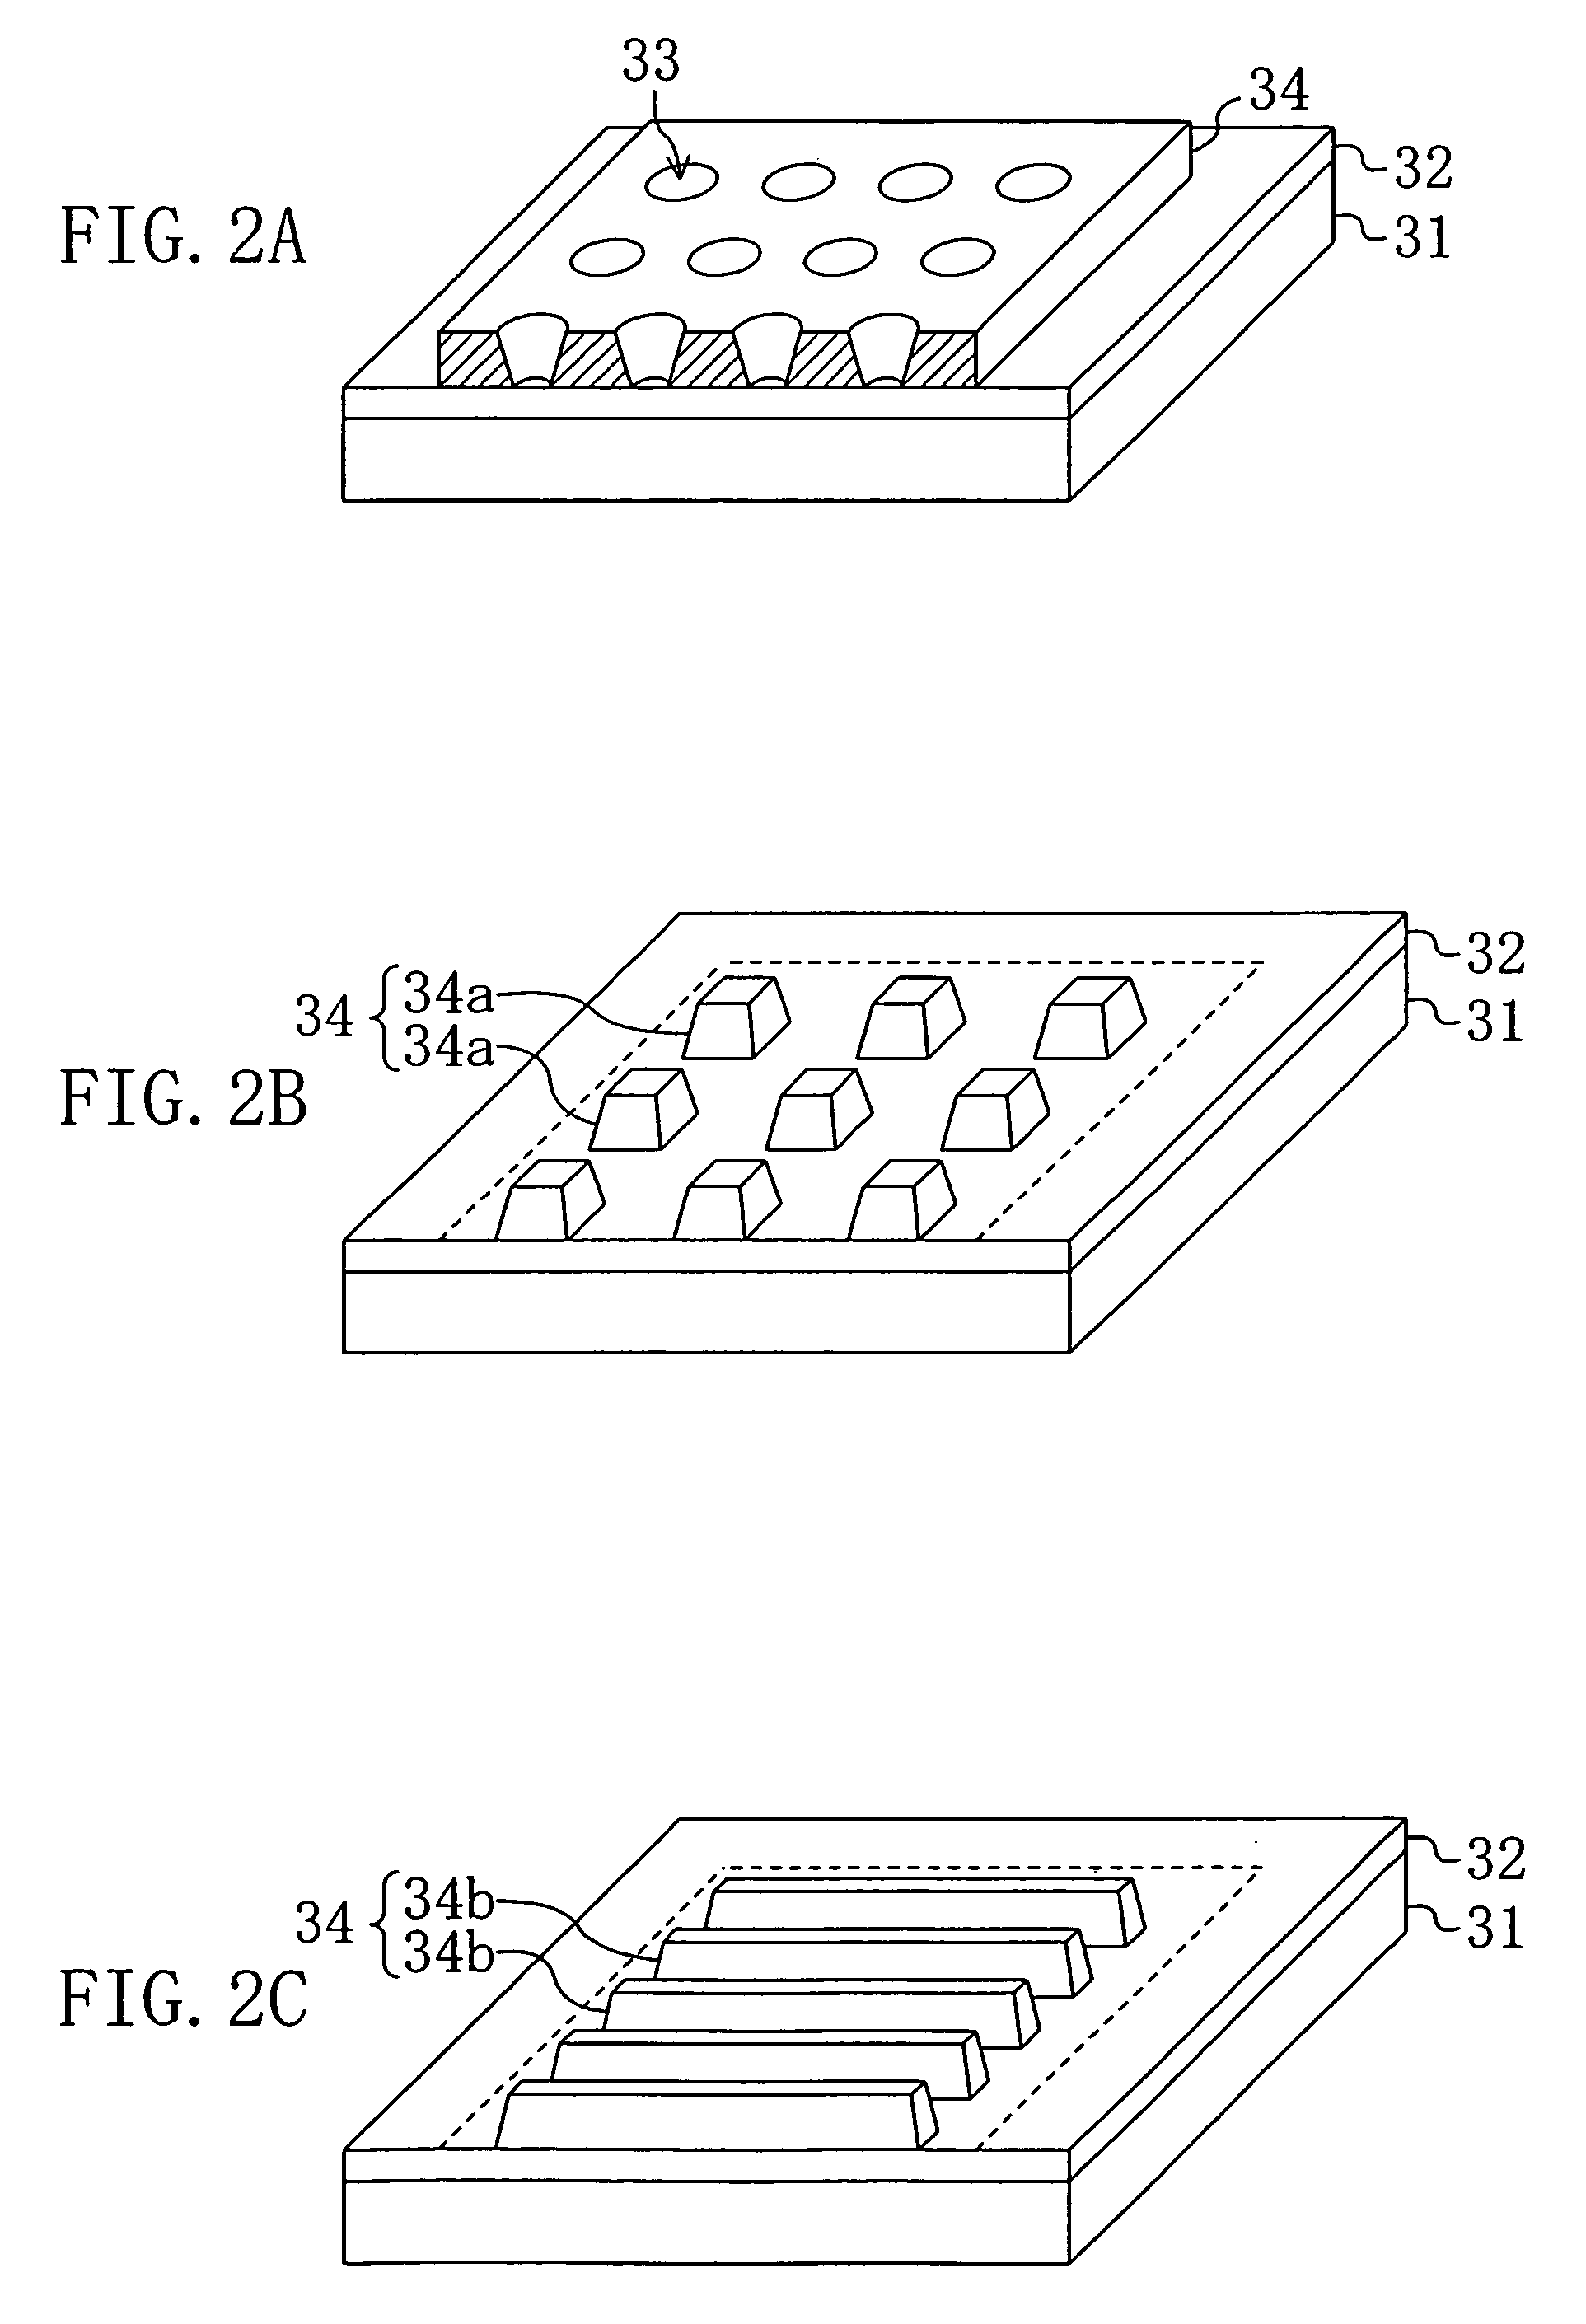 Non-volatile semiconductor memory device and manufacturing method thereof